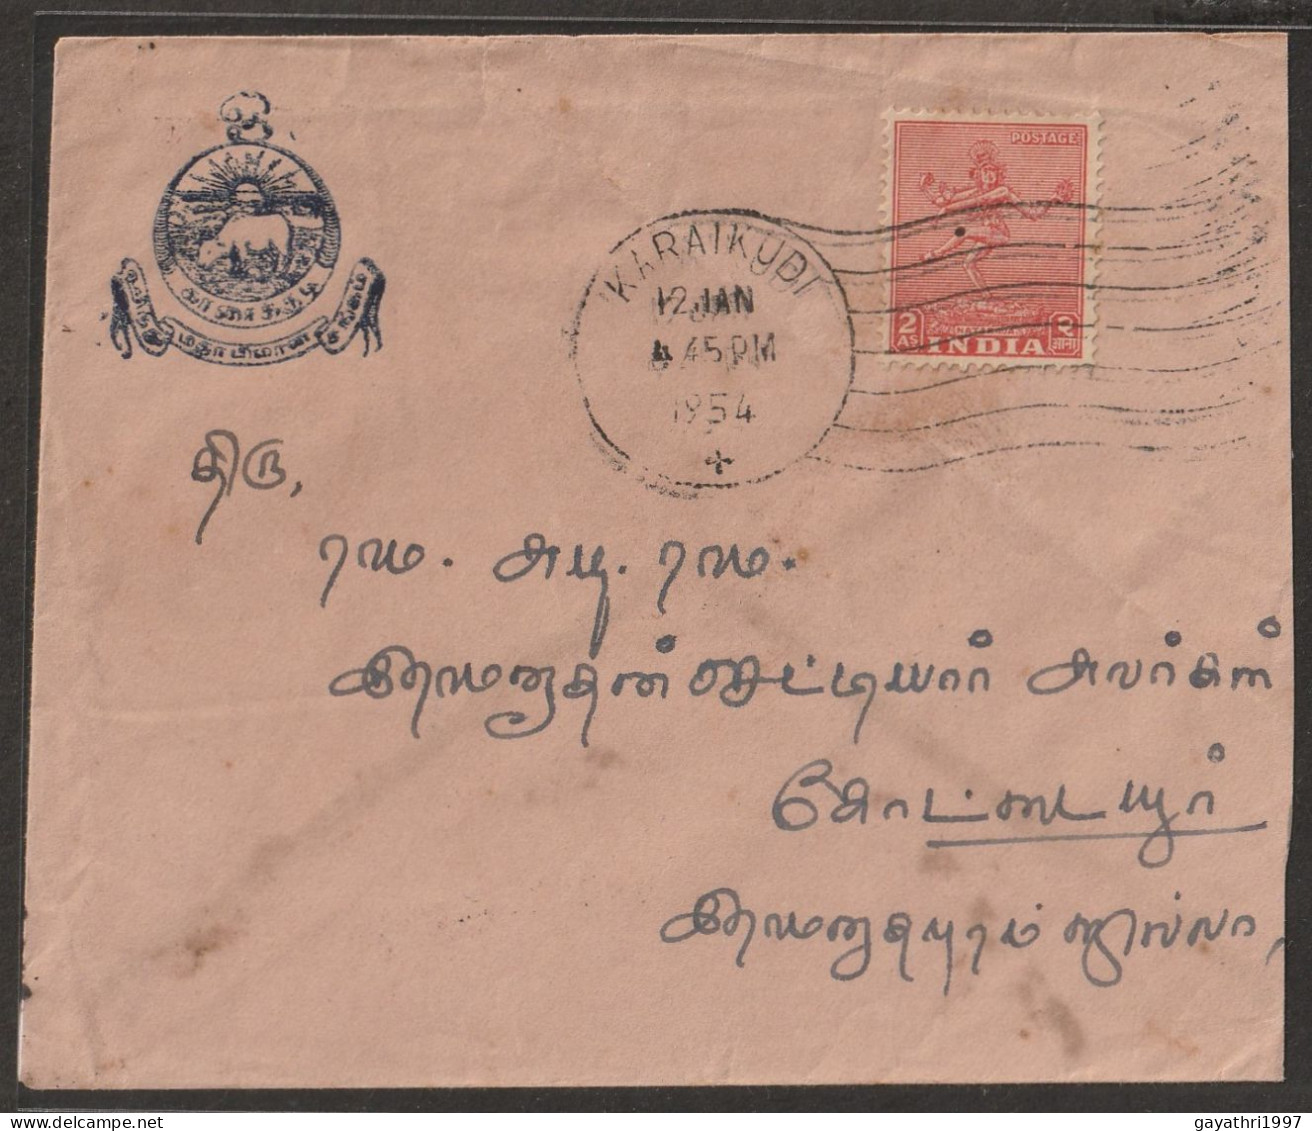 India 1954 Nataraja Stamp On Cover From Hindu Mathabane Sanga With Machine Cancellation To Party's(a184) - Hindouisme